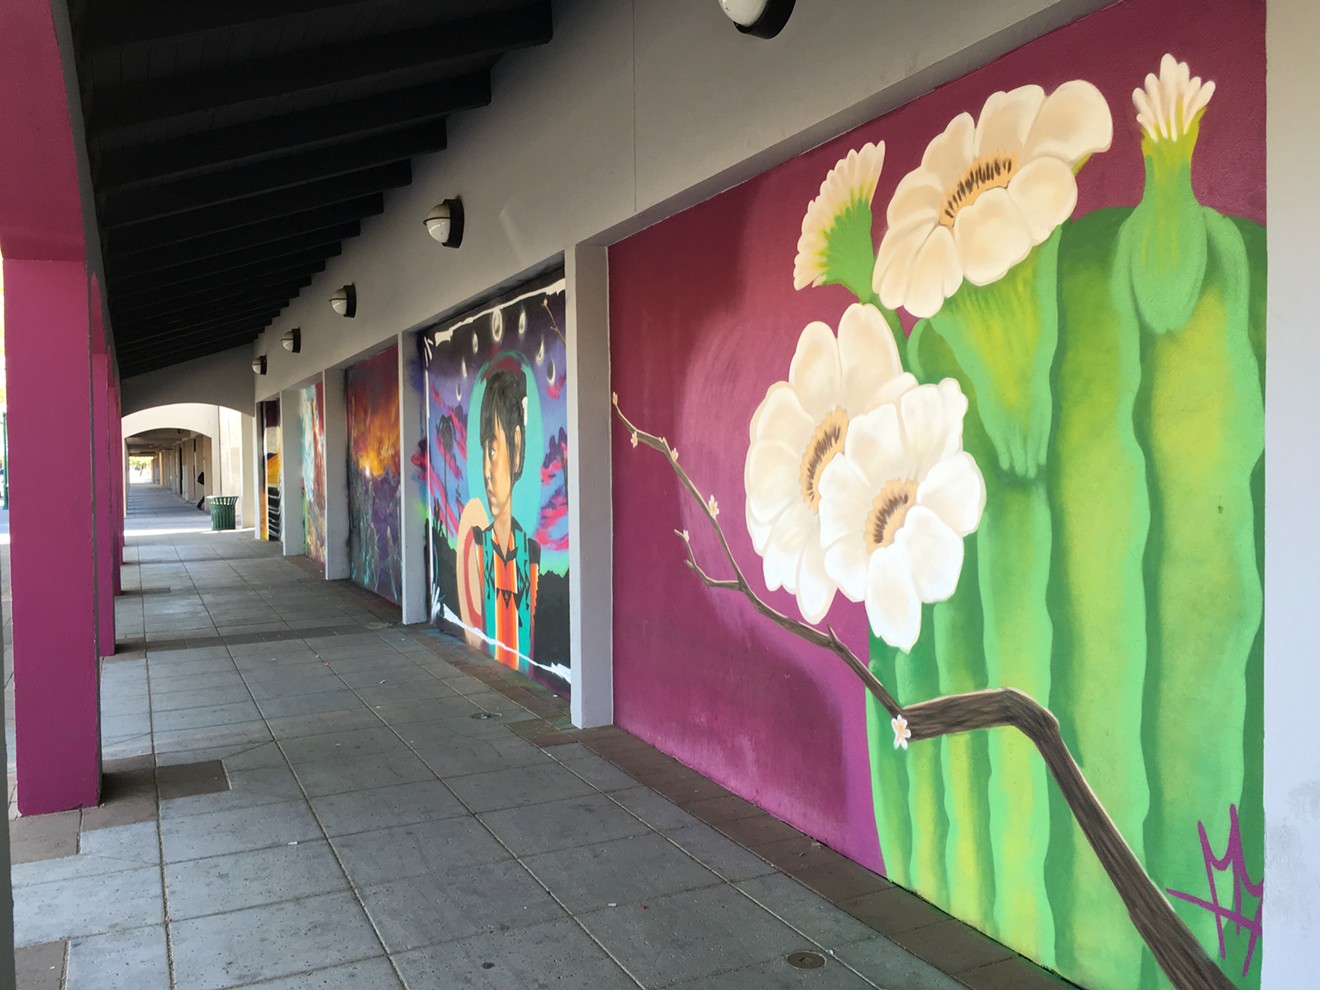 Murals painted to help create more vibrancy along Main Street in Mesa.